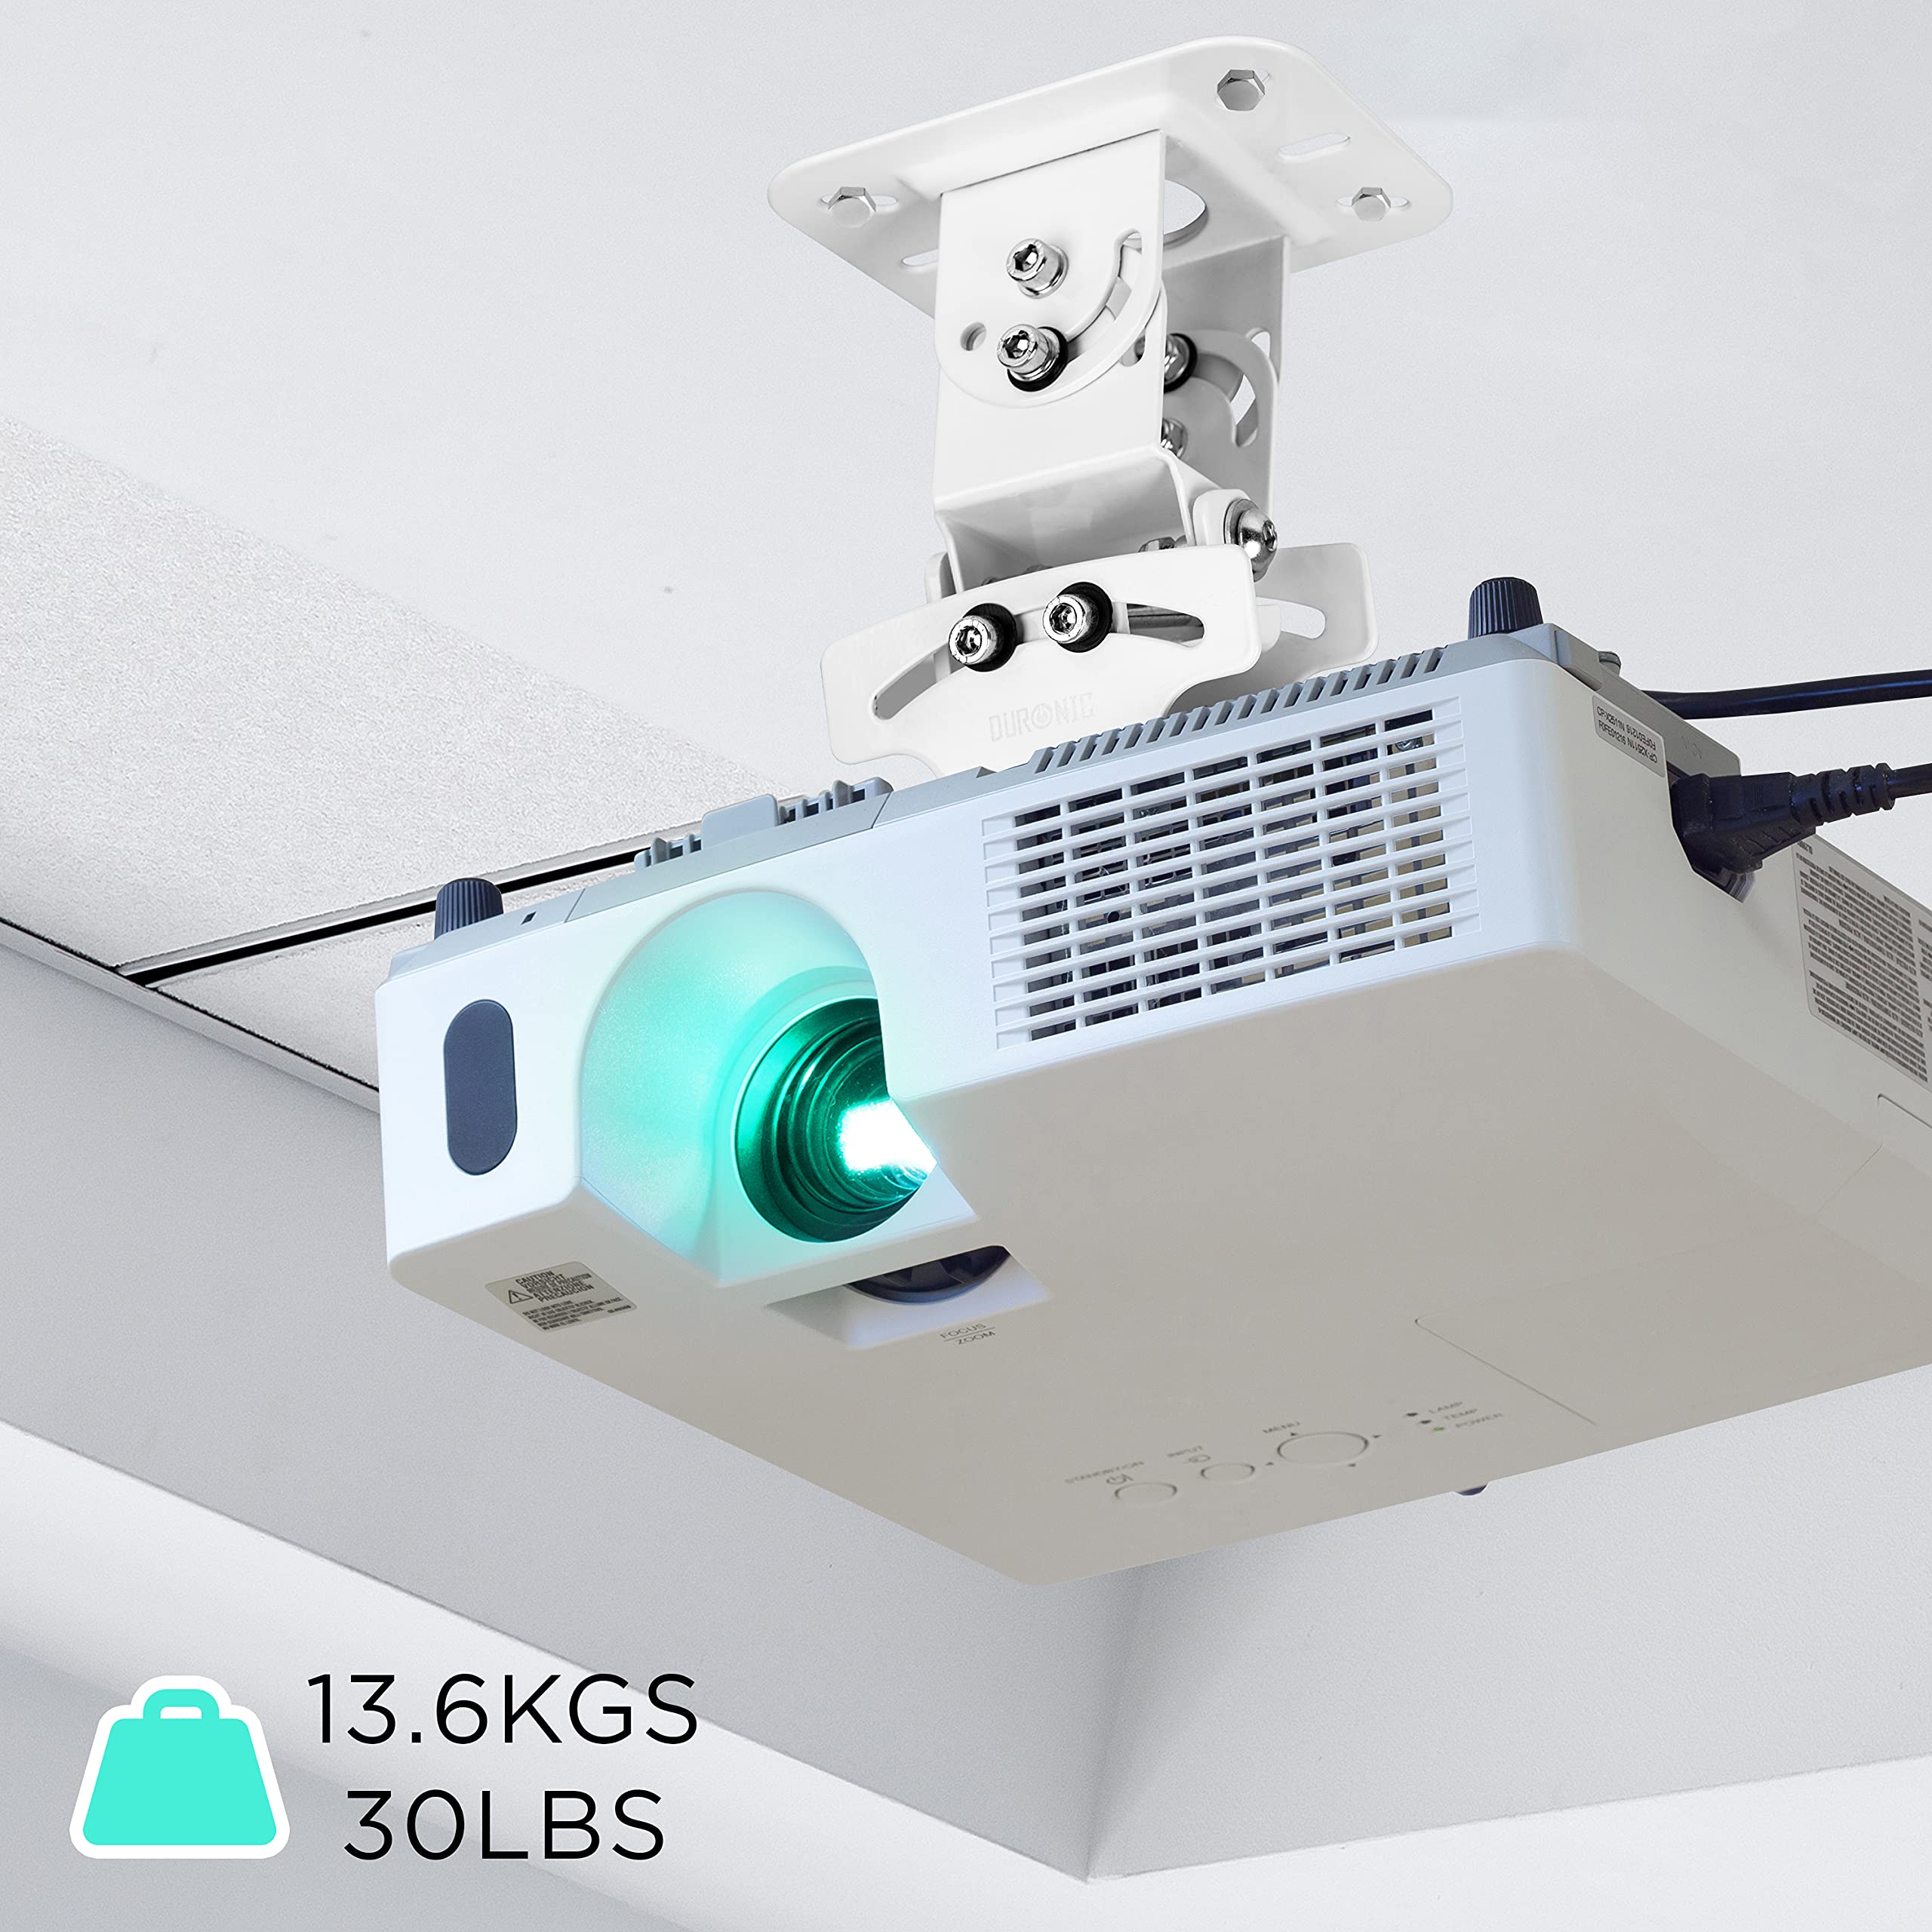 Duronic Projector Mount Stand for Ceiling or Wall Bracket PB05XB | 13.6kg Capacity | Universal Heavy Duty Adjustable Clamp | Tilt Swivel Rotate | White